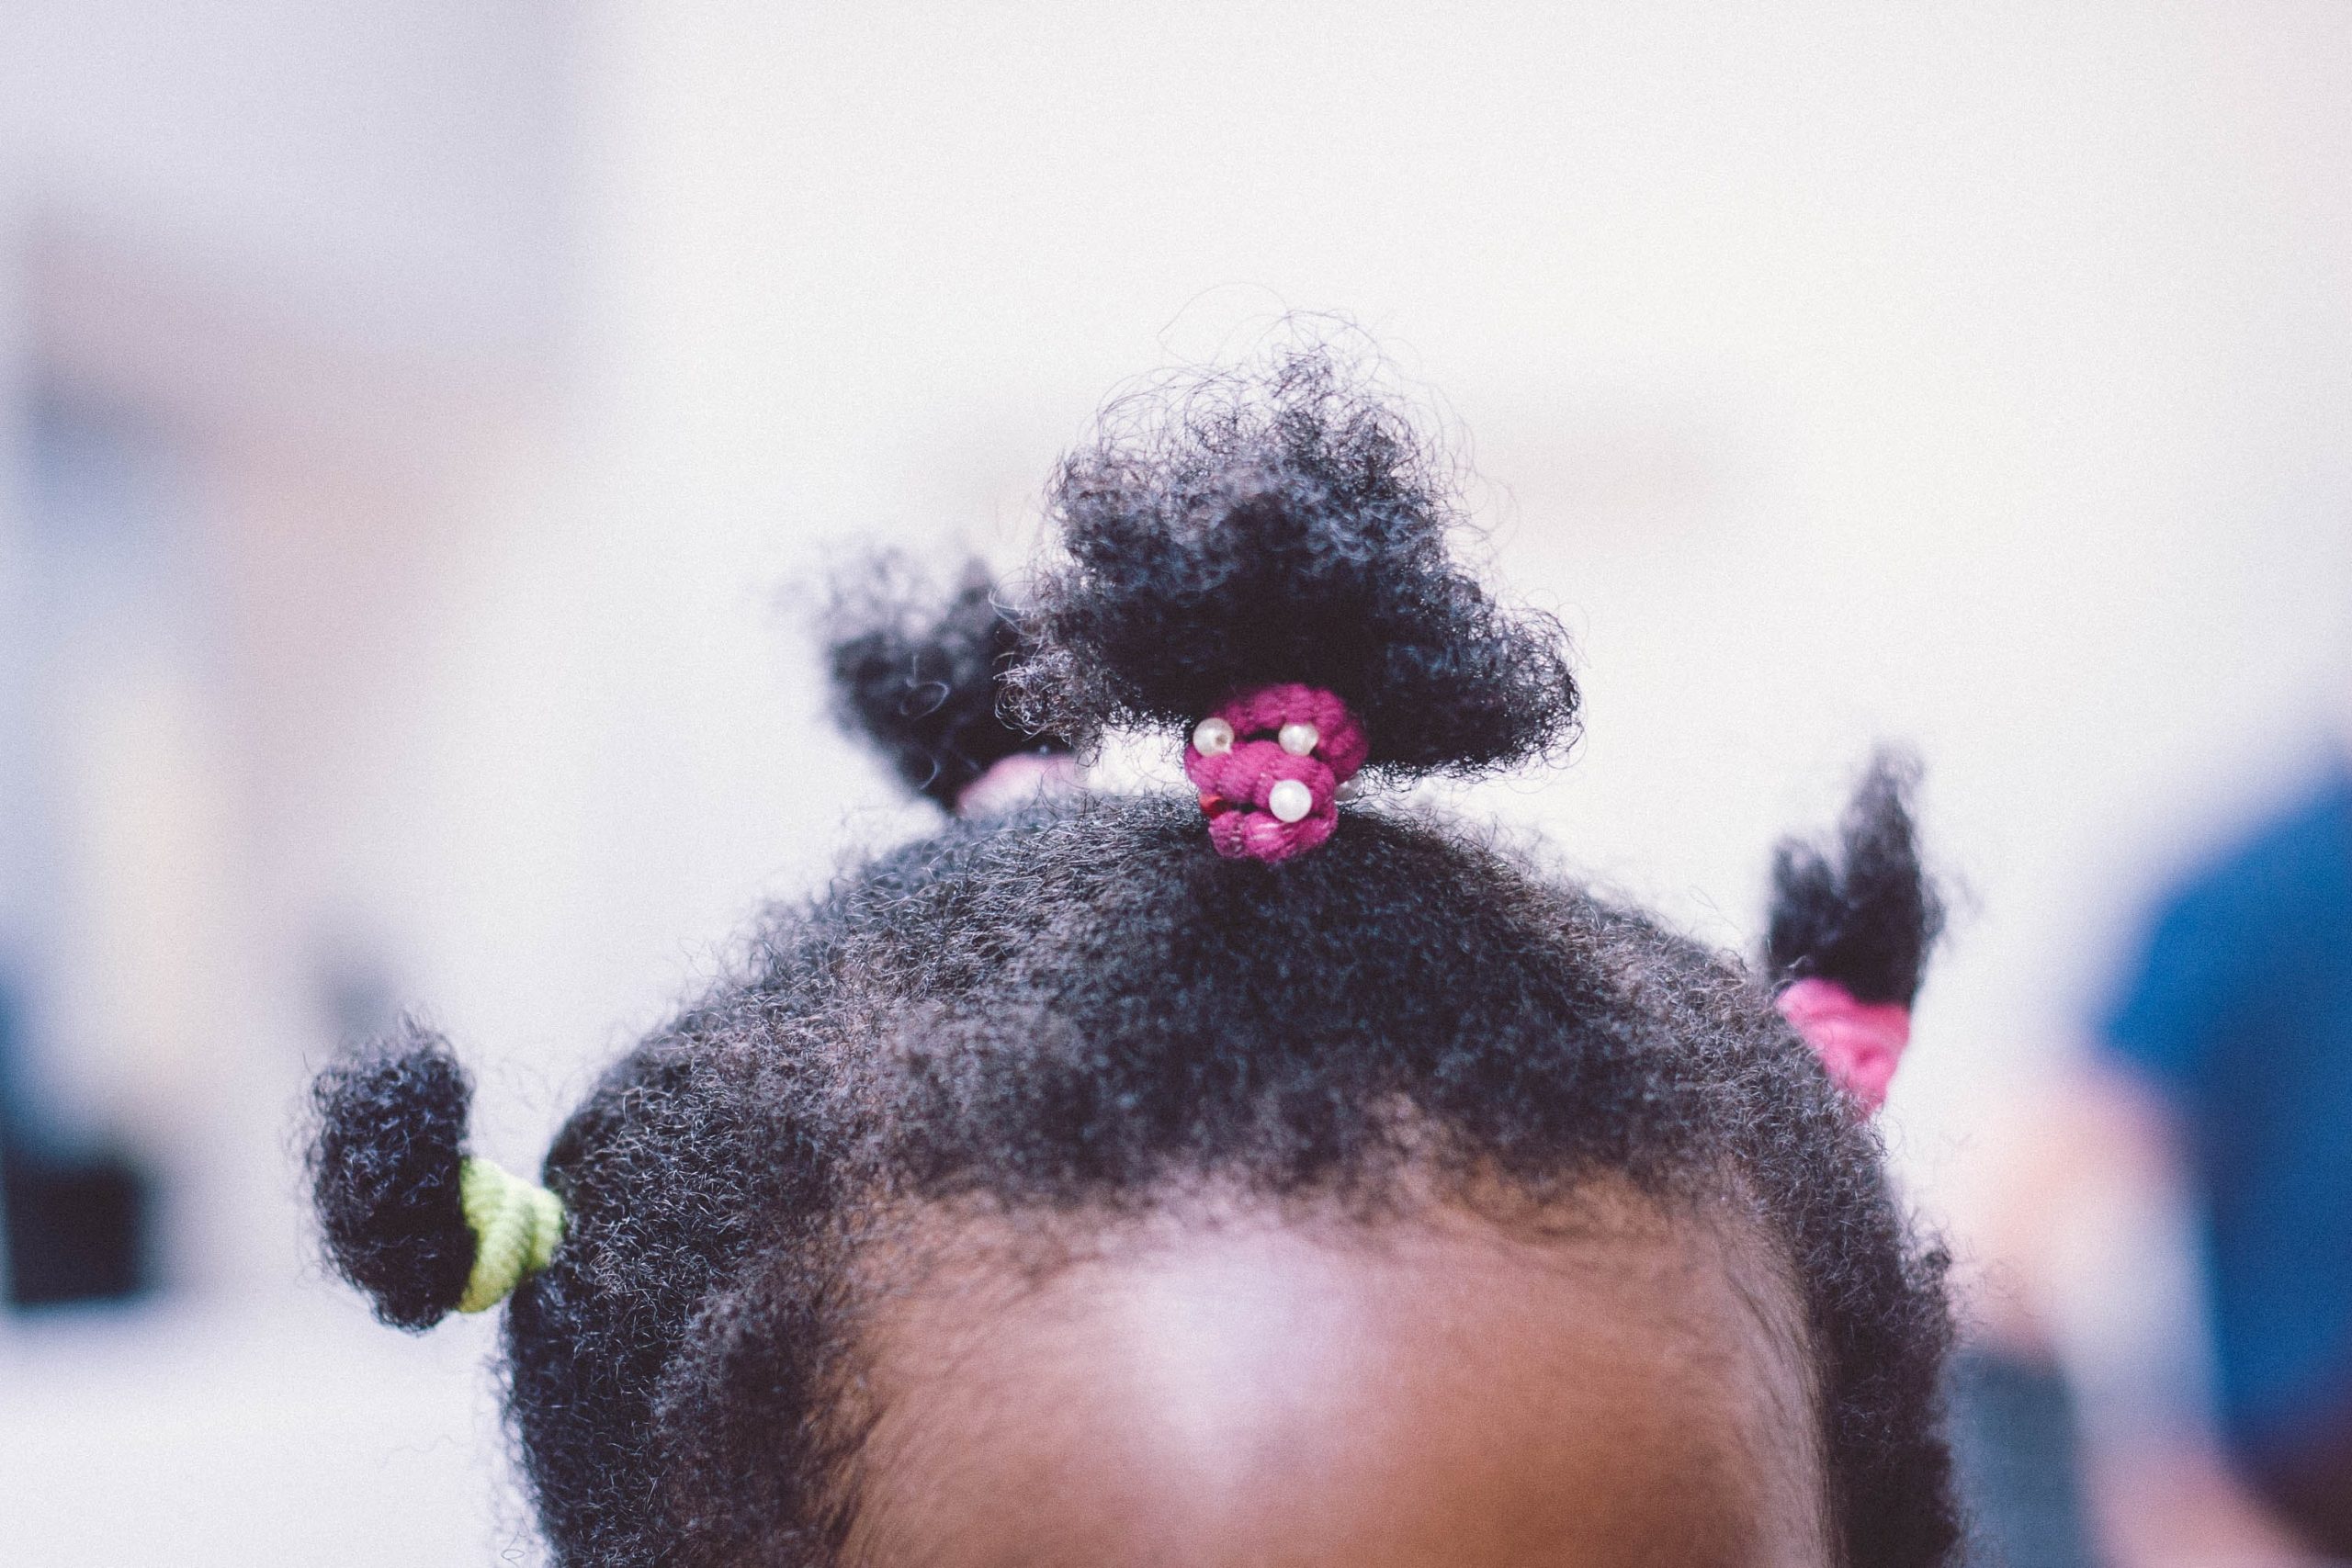 A young black girl has her hair knotted before being styled.